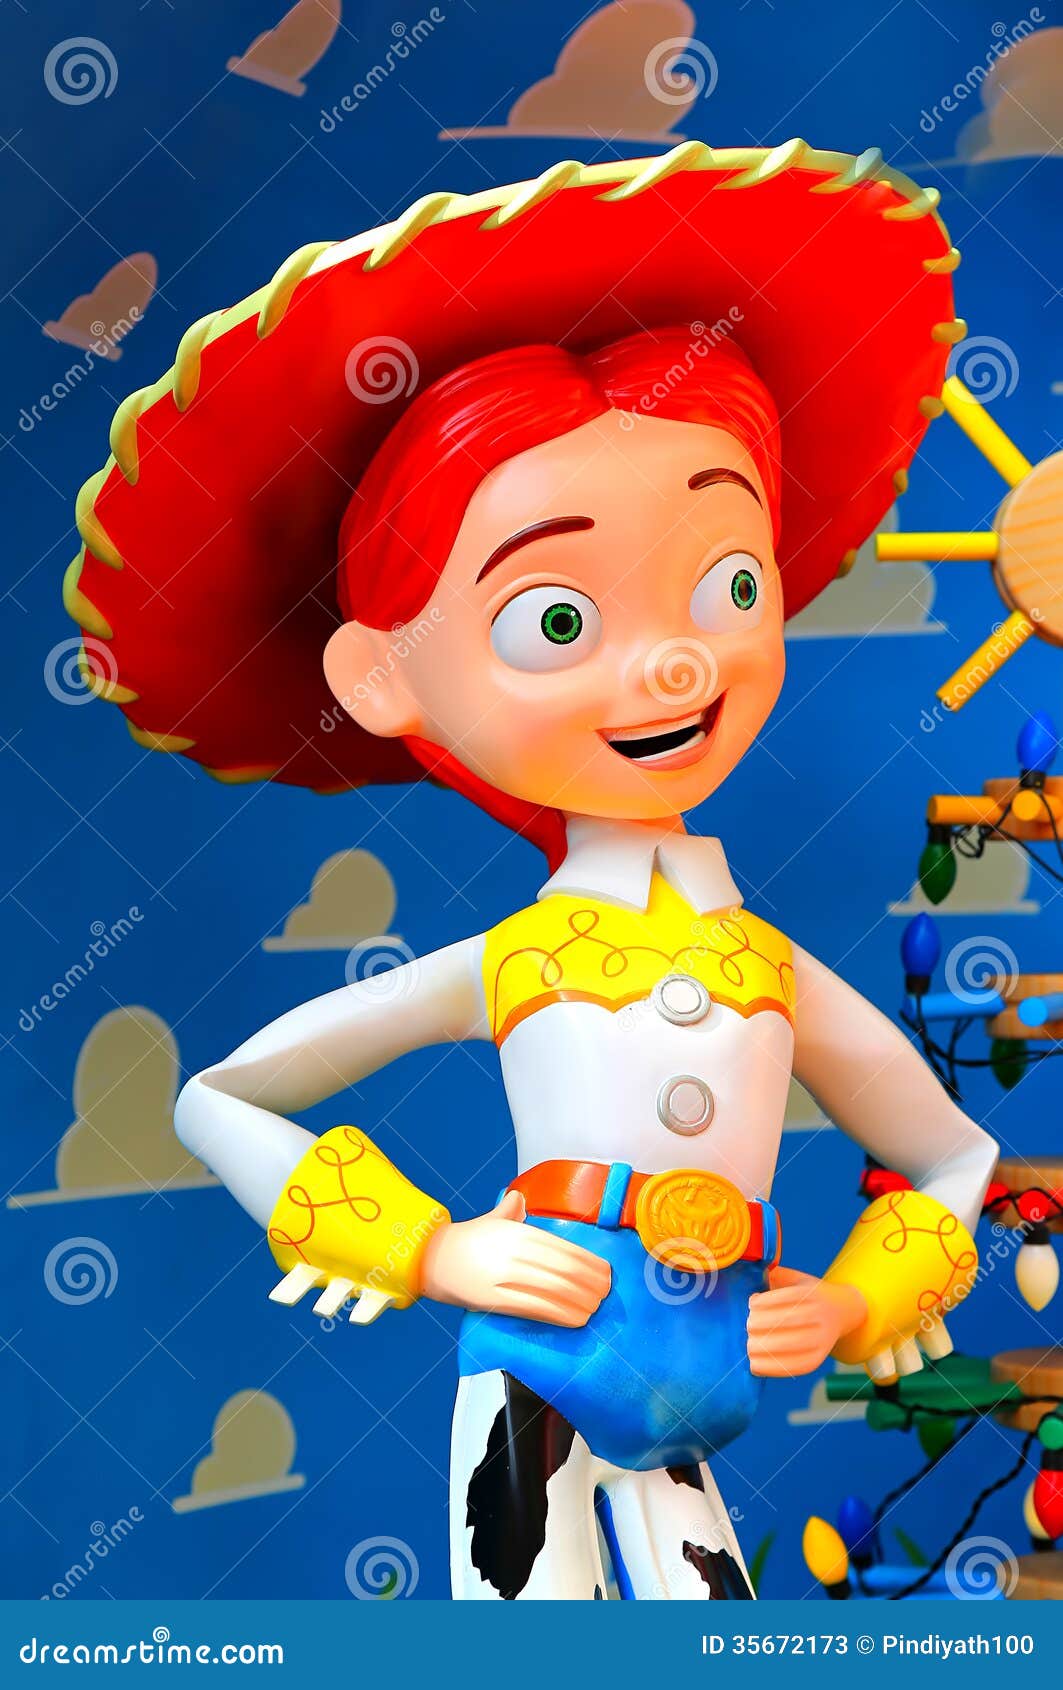 toy story characters girl cowboy